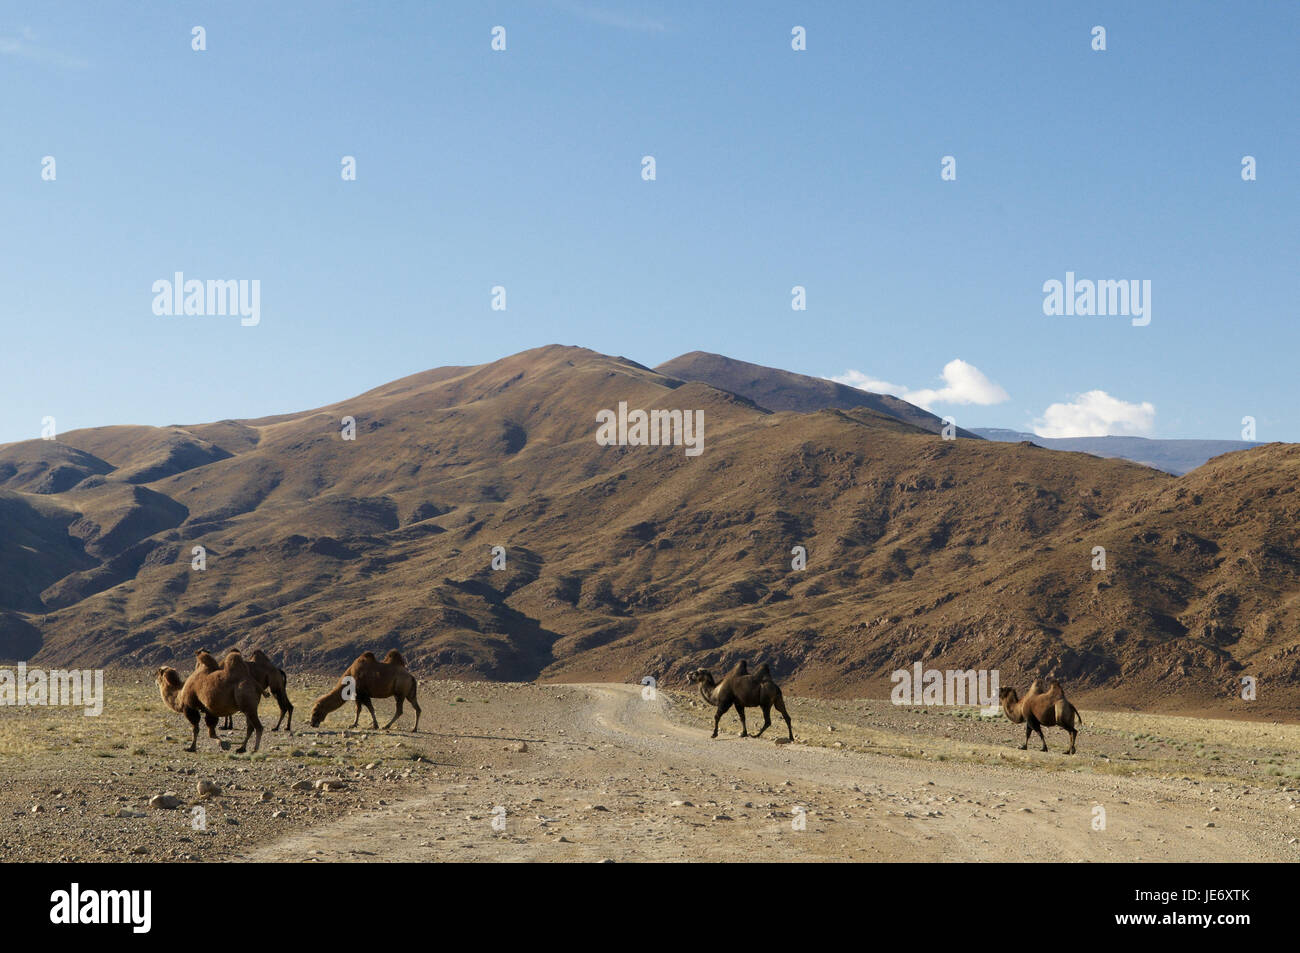 Mongolia, Central Asia, Gobi Altay, mountains, steppe, Bayan Olgii, west province, camels, Stock Photo